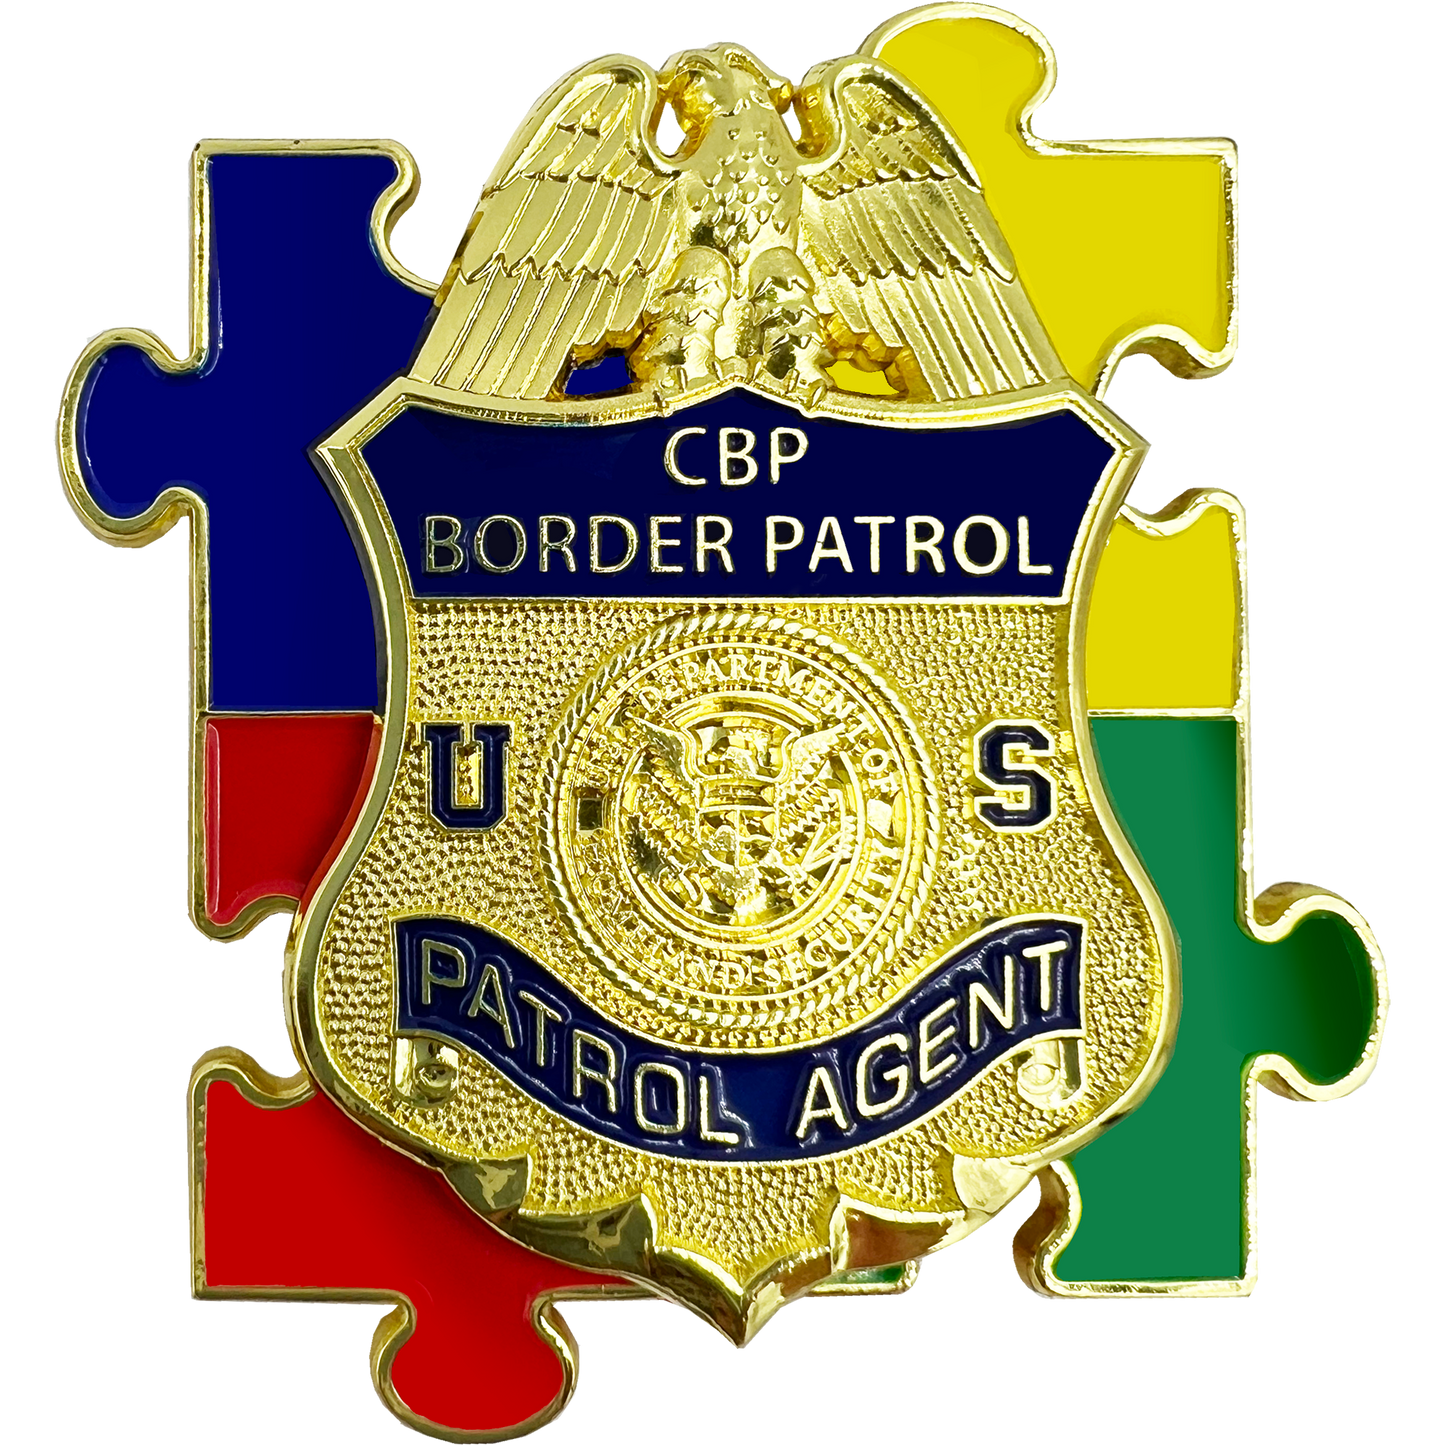 EL7-014 CBP Border Patrol Agent Autism Awareness Month lapel pin puzzle pieces display like a challenge coin